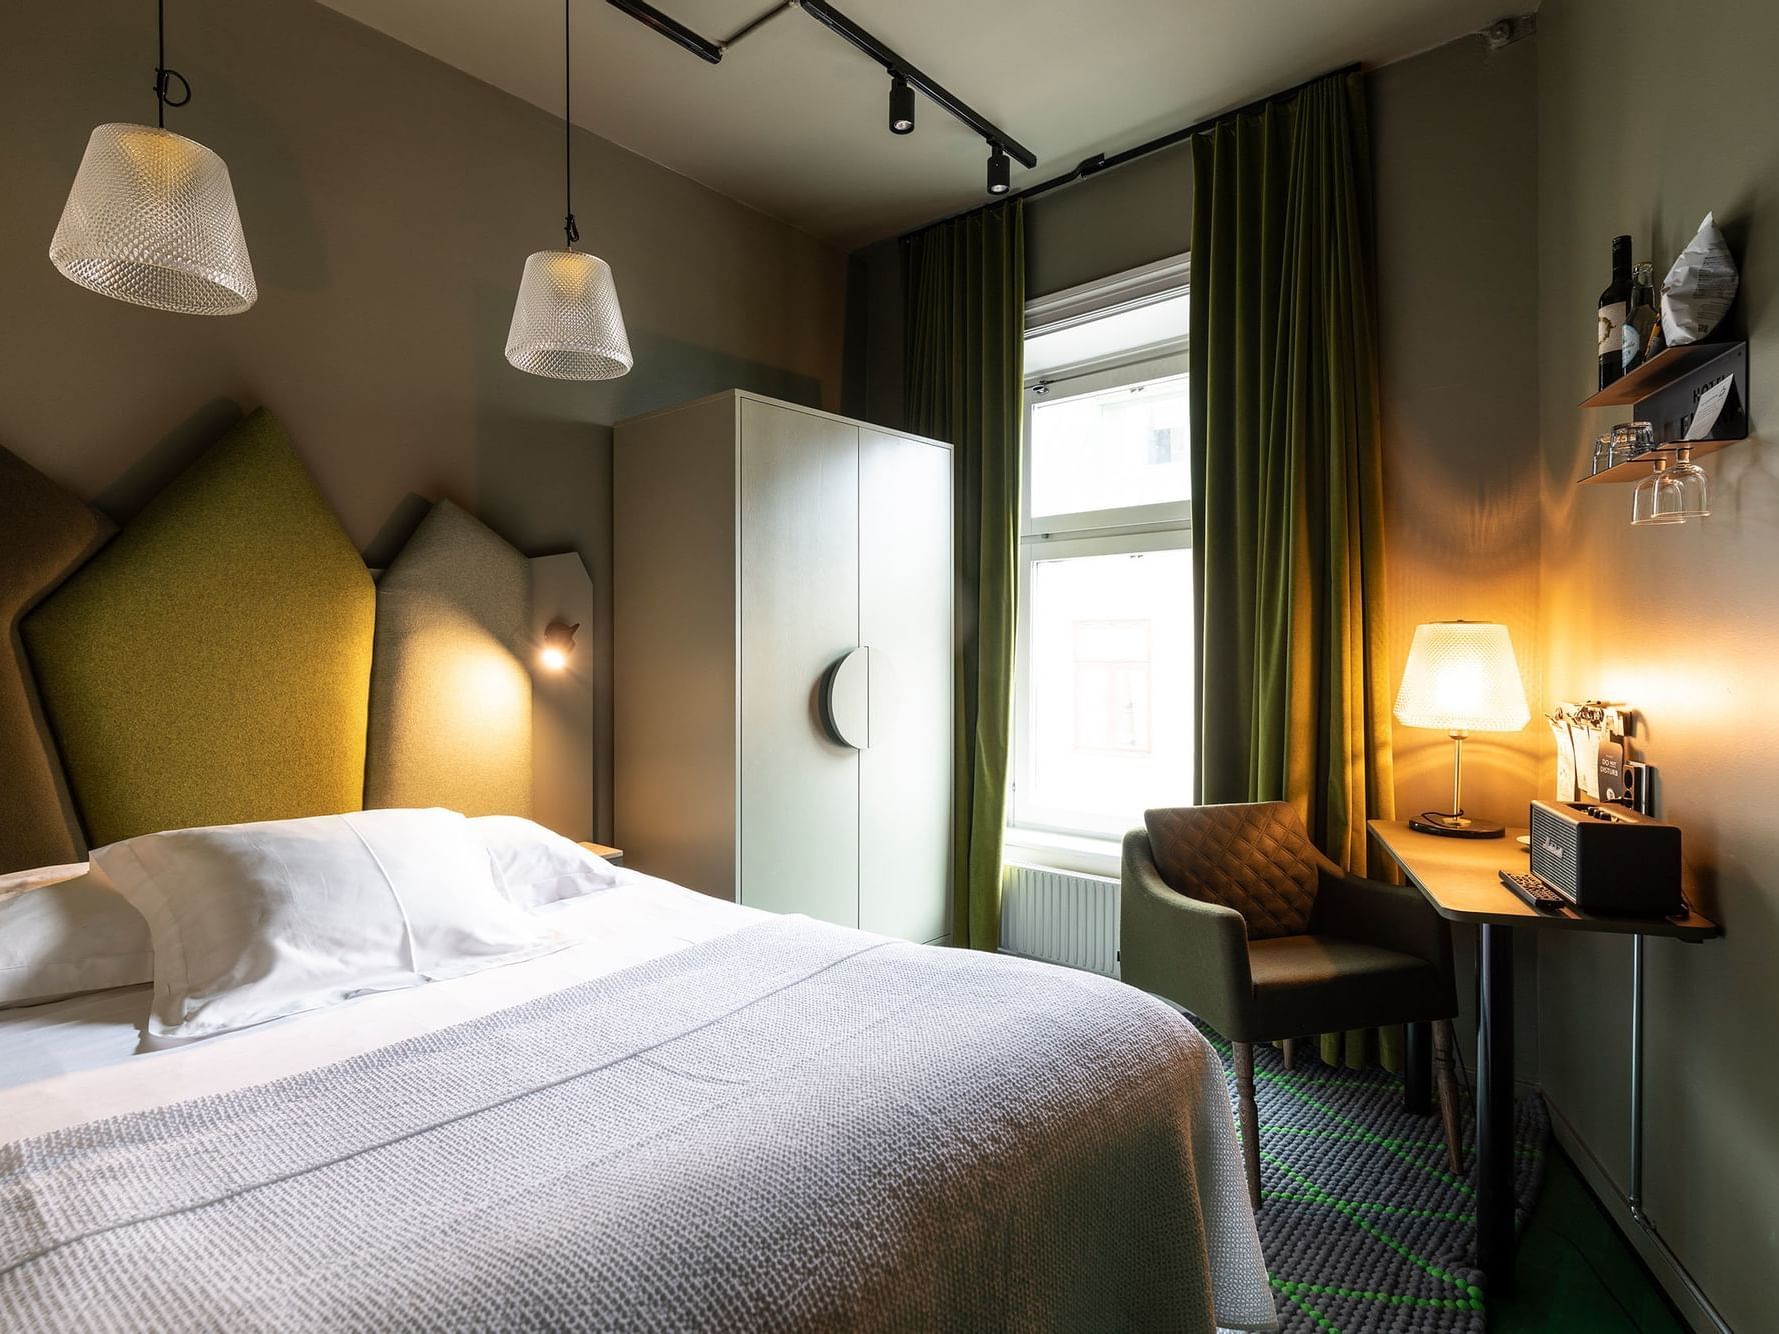 Stay in comfort at our Gothenburg accommodation